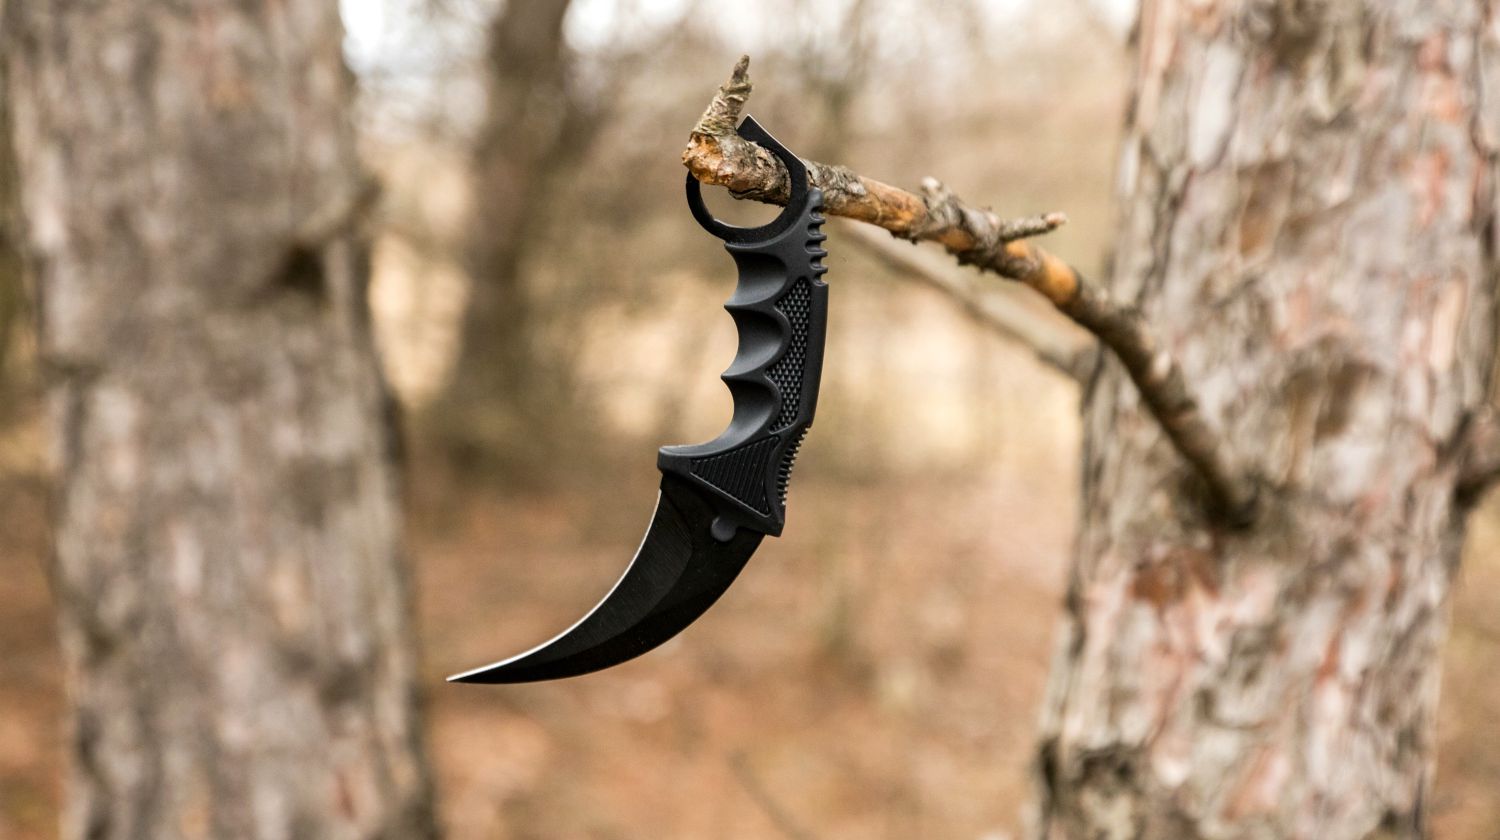 Karambit knife hanging on the branch in the autumn forest | What Are The Uses Of Karambit Knives? | Featured